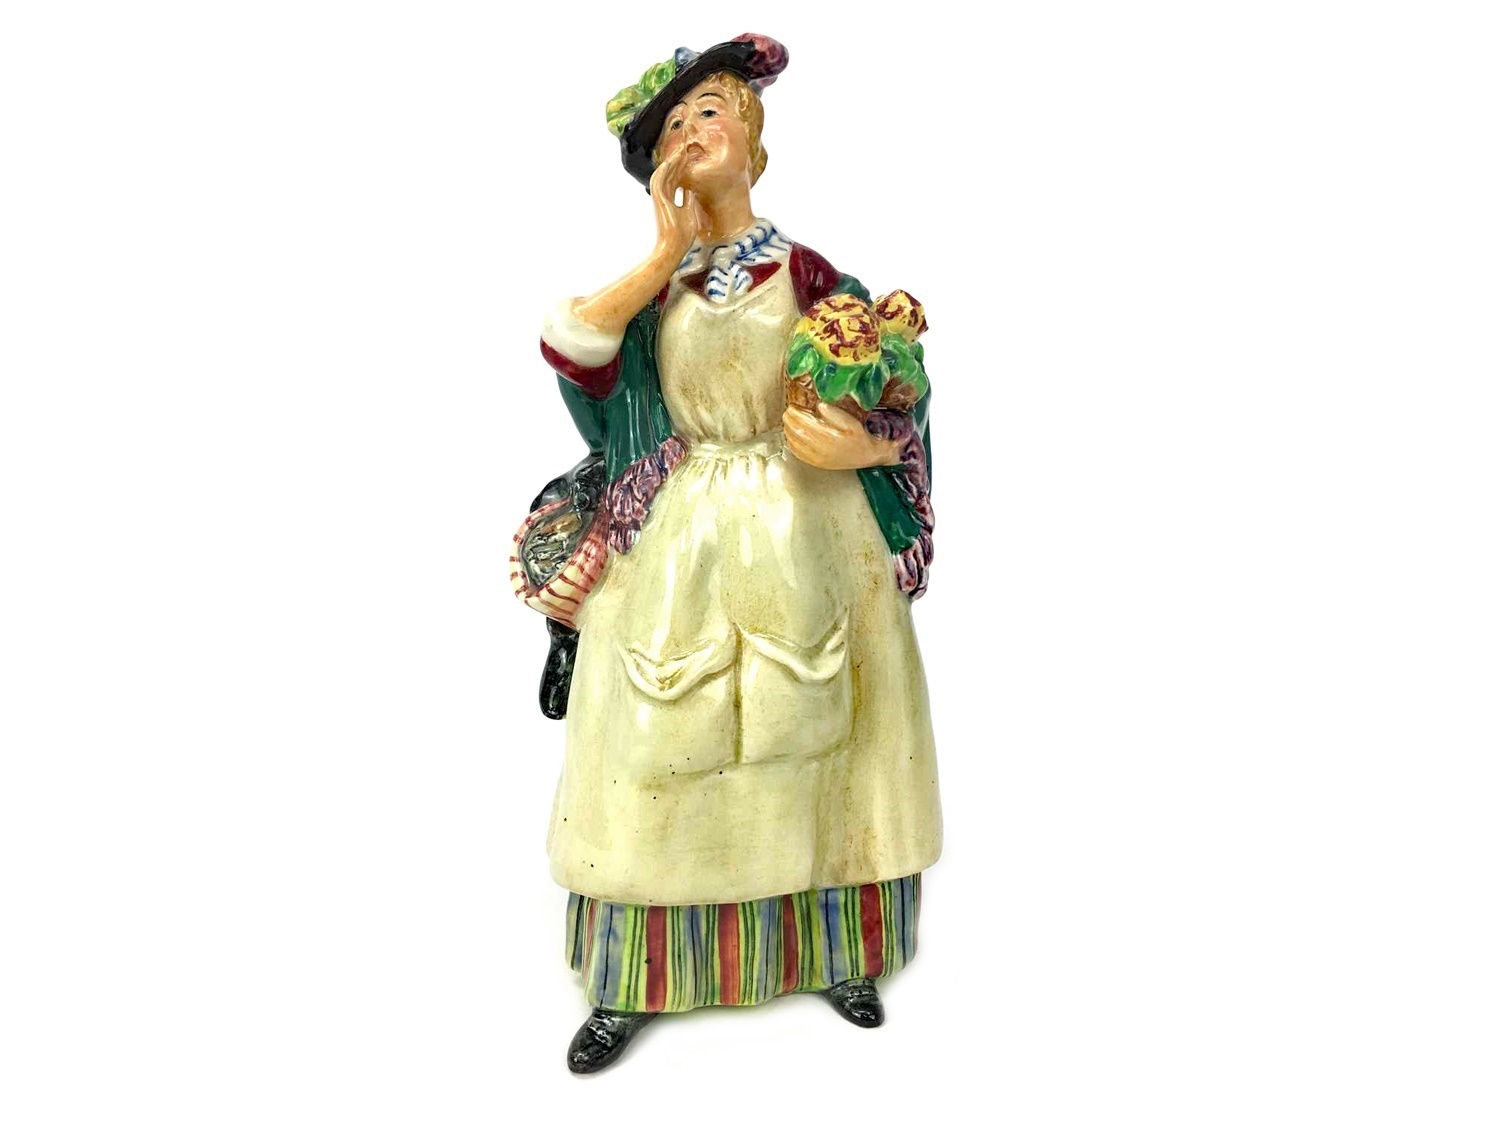 A ROYAL DOULTON FIGURE OF ODDS & ENDS